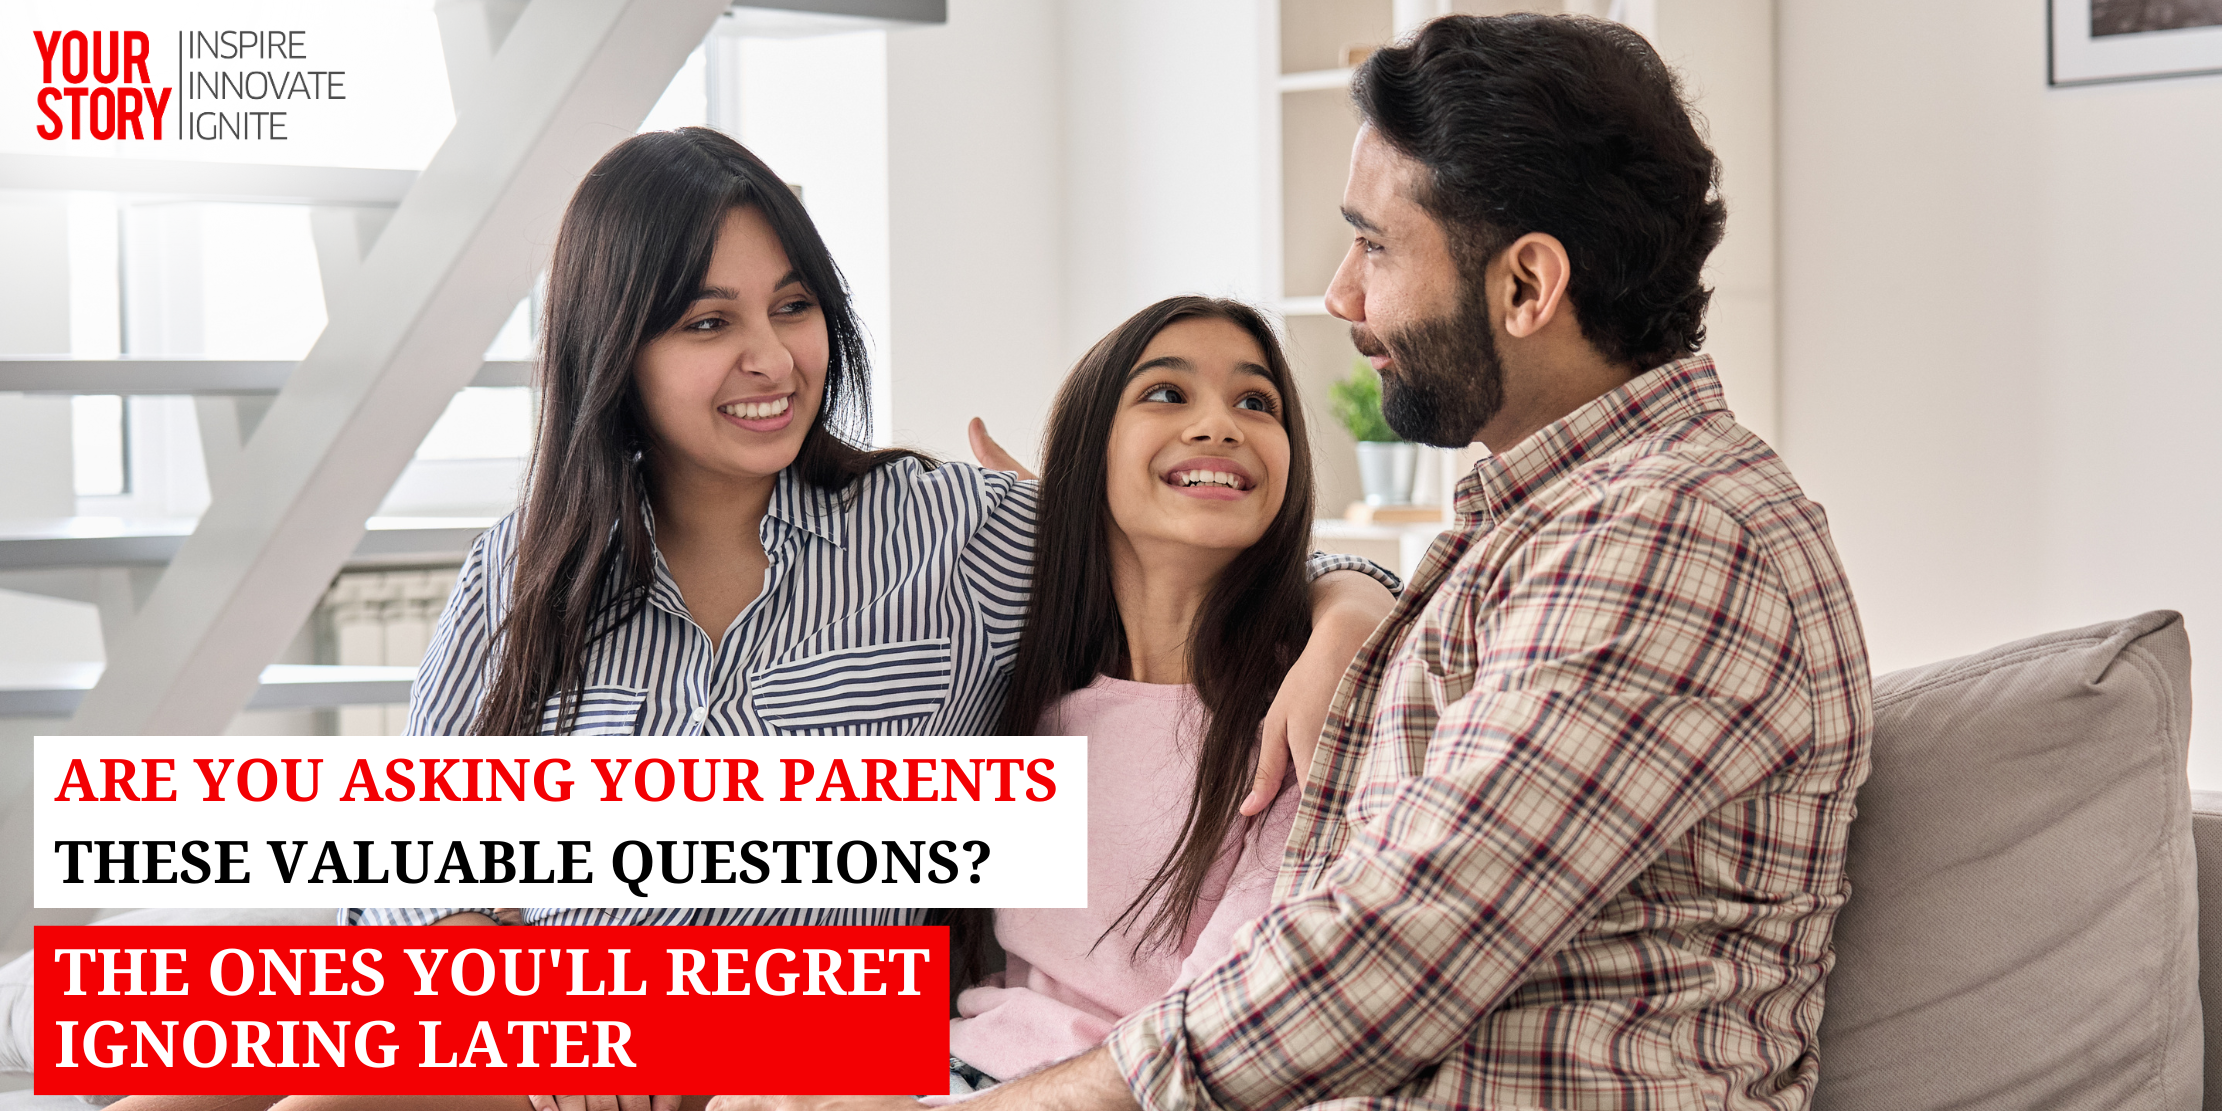 Are You Asking Your Parents These Valuable Questions? The Ones You'll Regret Ignoring Later